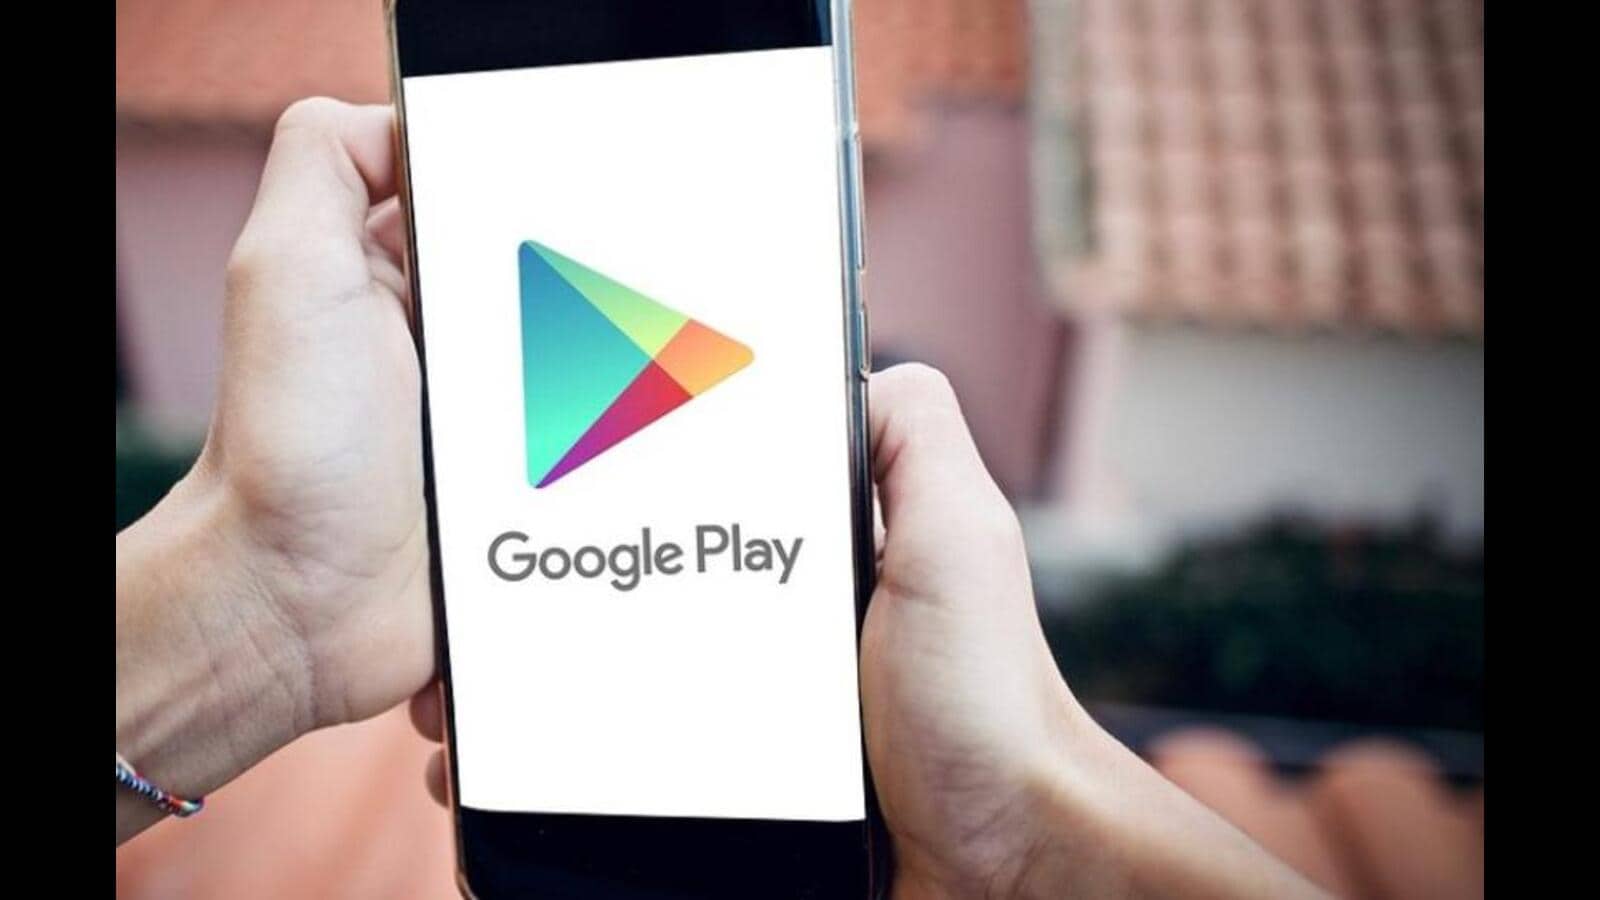 Google’s pilot for app billing choice to begin in late 2022